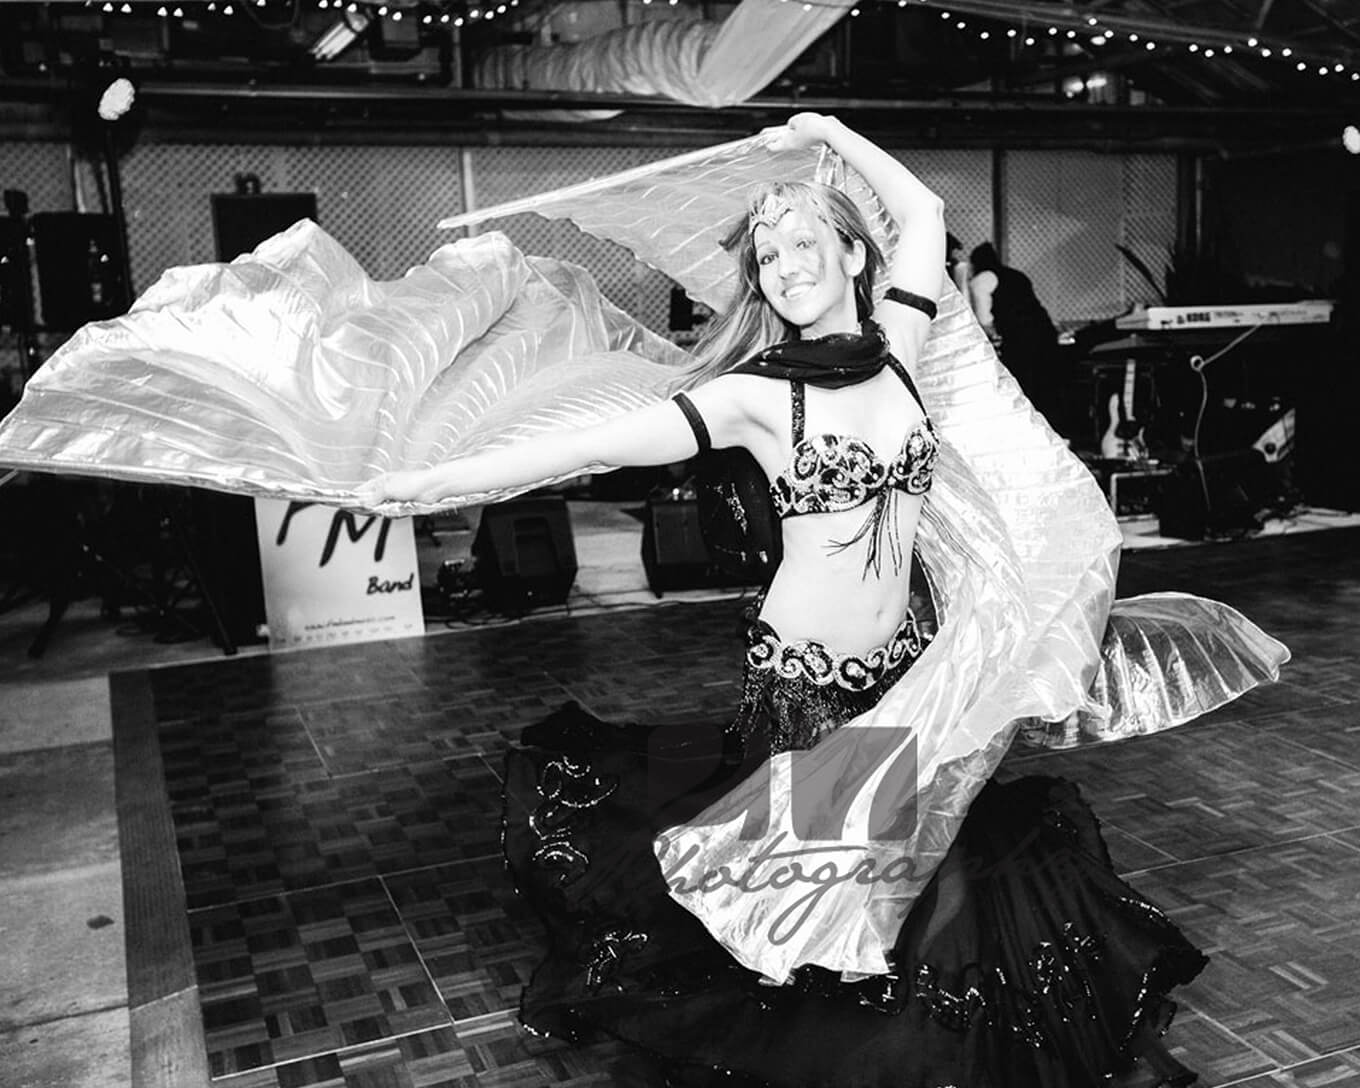 Donna wearing her isis wings belly dance outfit. Performing at a wedding event.